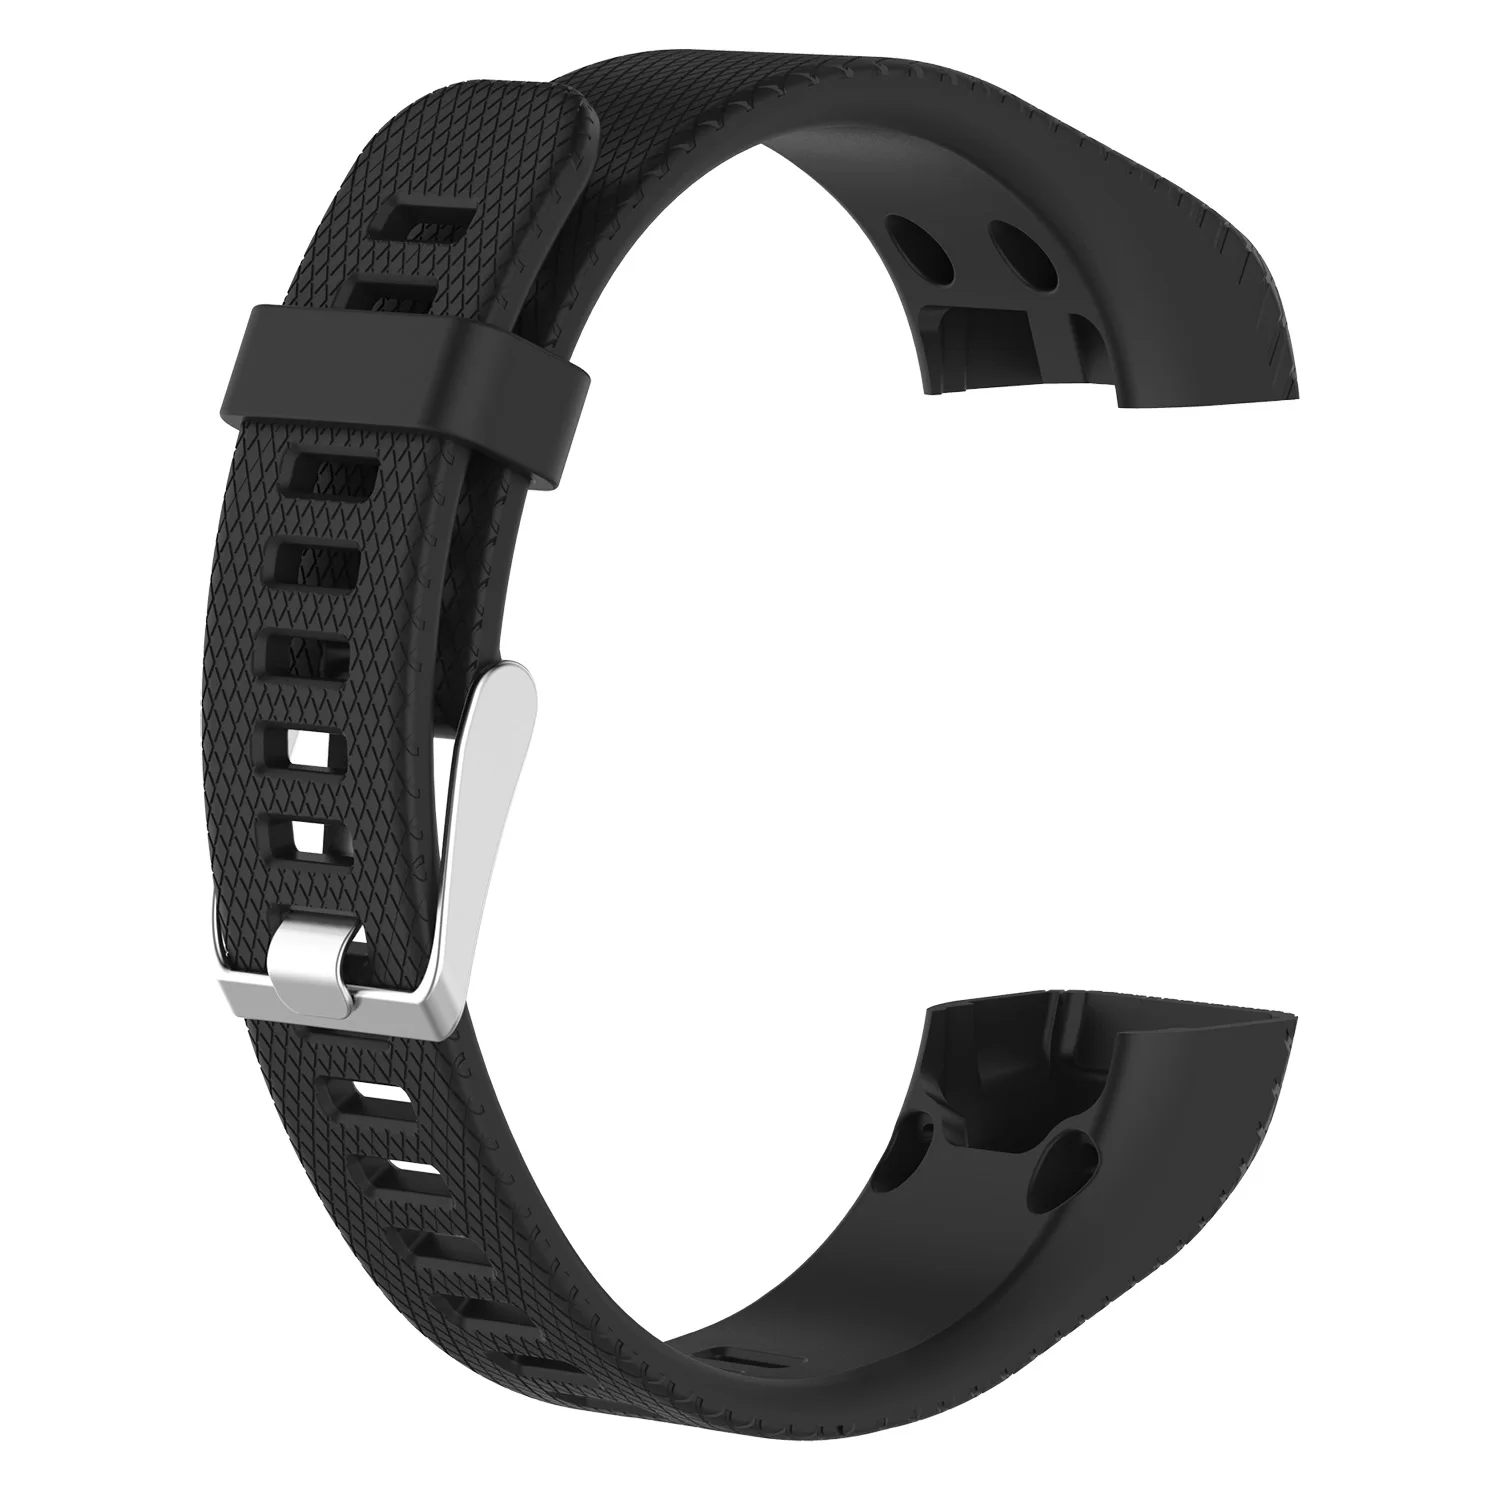 Replacement Band Sports Silicone Wristwatch Strap Tool For Garmin Vivoactive HR 